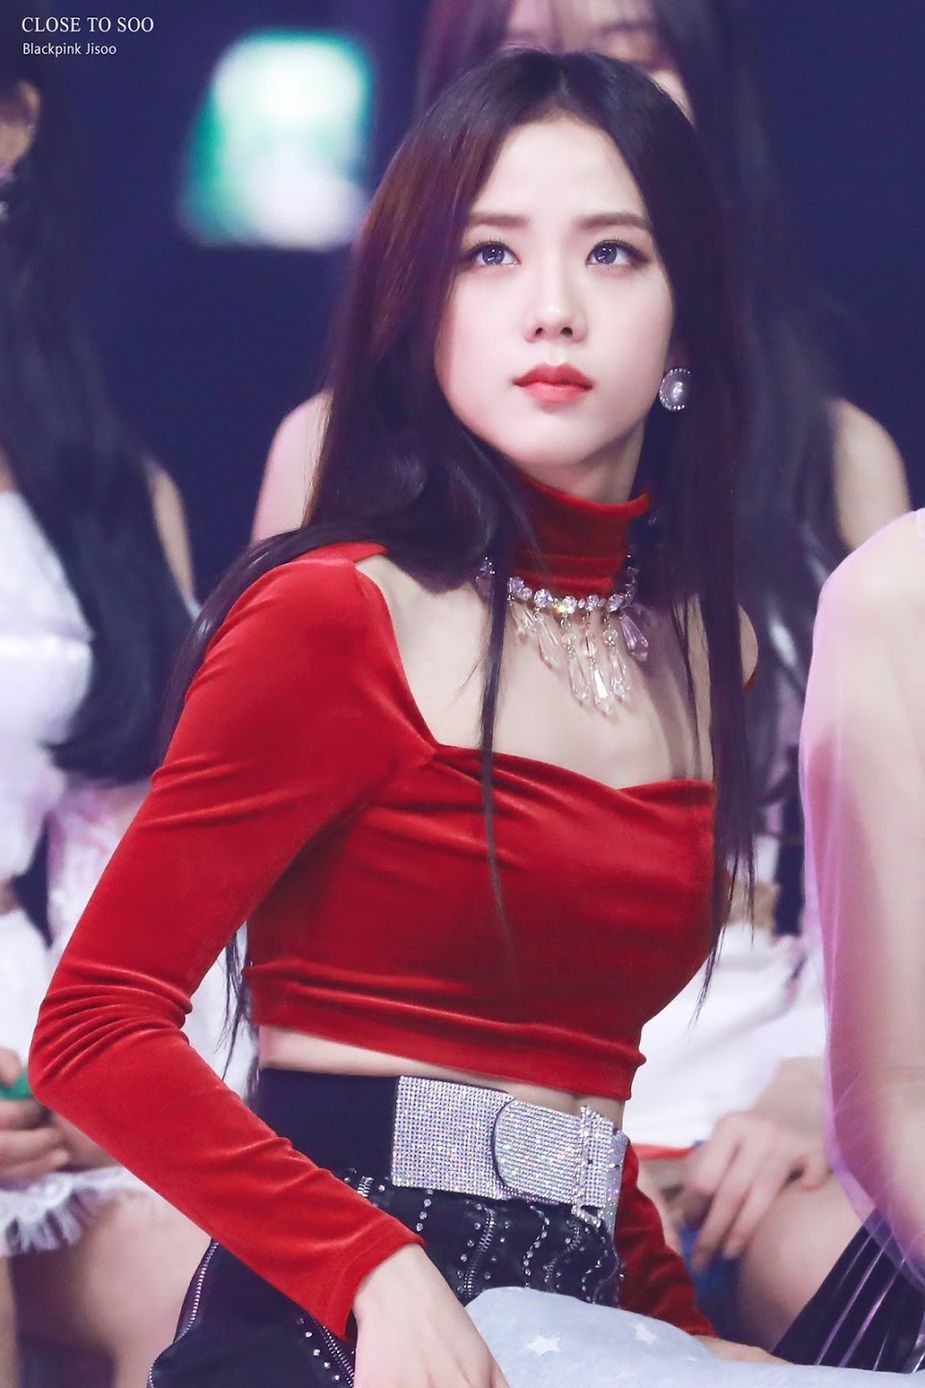 Here Are 8 Random Facts About BLACKPINK's Jisoo That Everyone Should ...